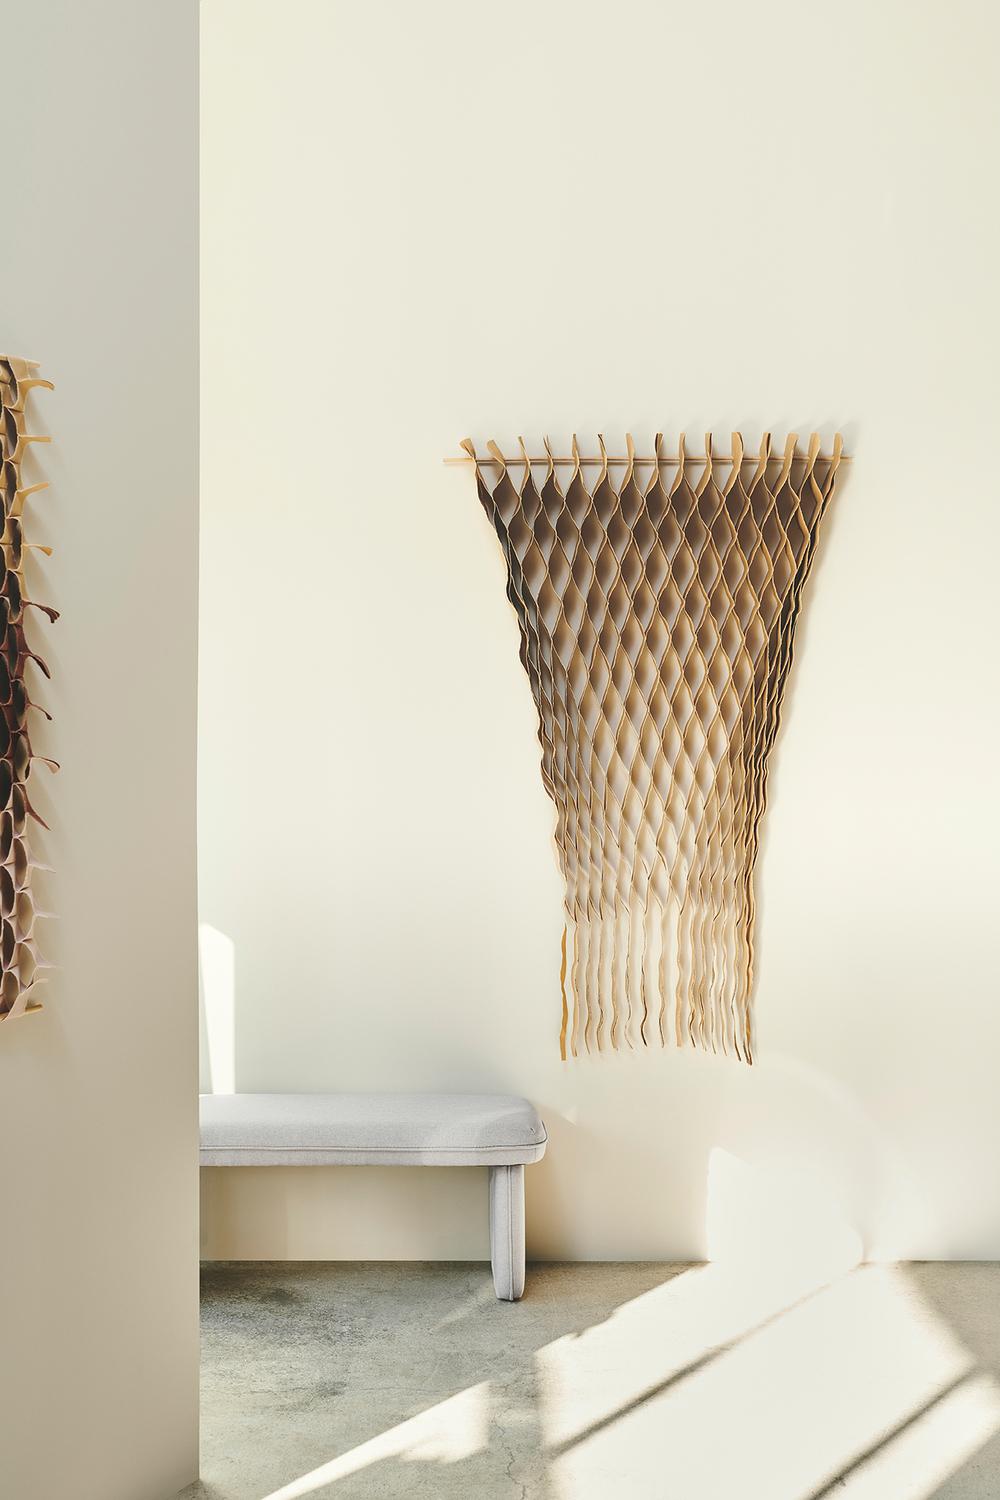 Sand Flow Wall Art by Applicata
Dimensions: D 10 x W 100 x H 150 cm
Materials: Textile.

Available in blue, brown, rose, and sand colors.

The FLOW Collection is a series of handmade textile art with roots in haute couture's flowing design